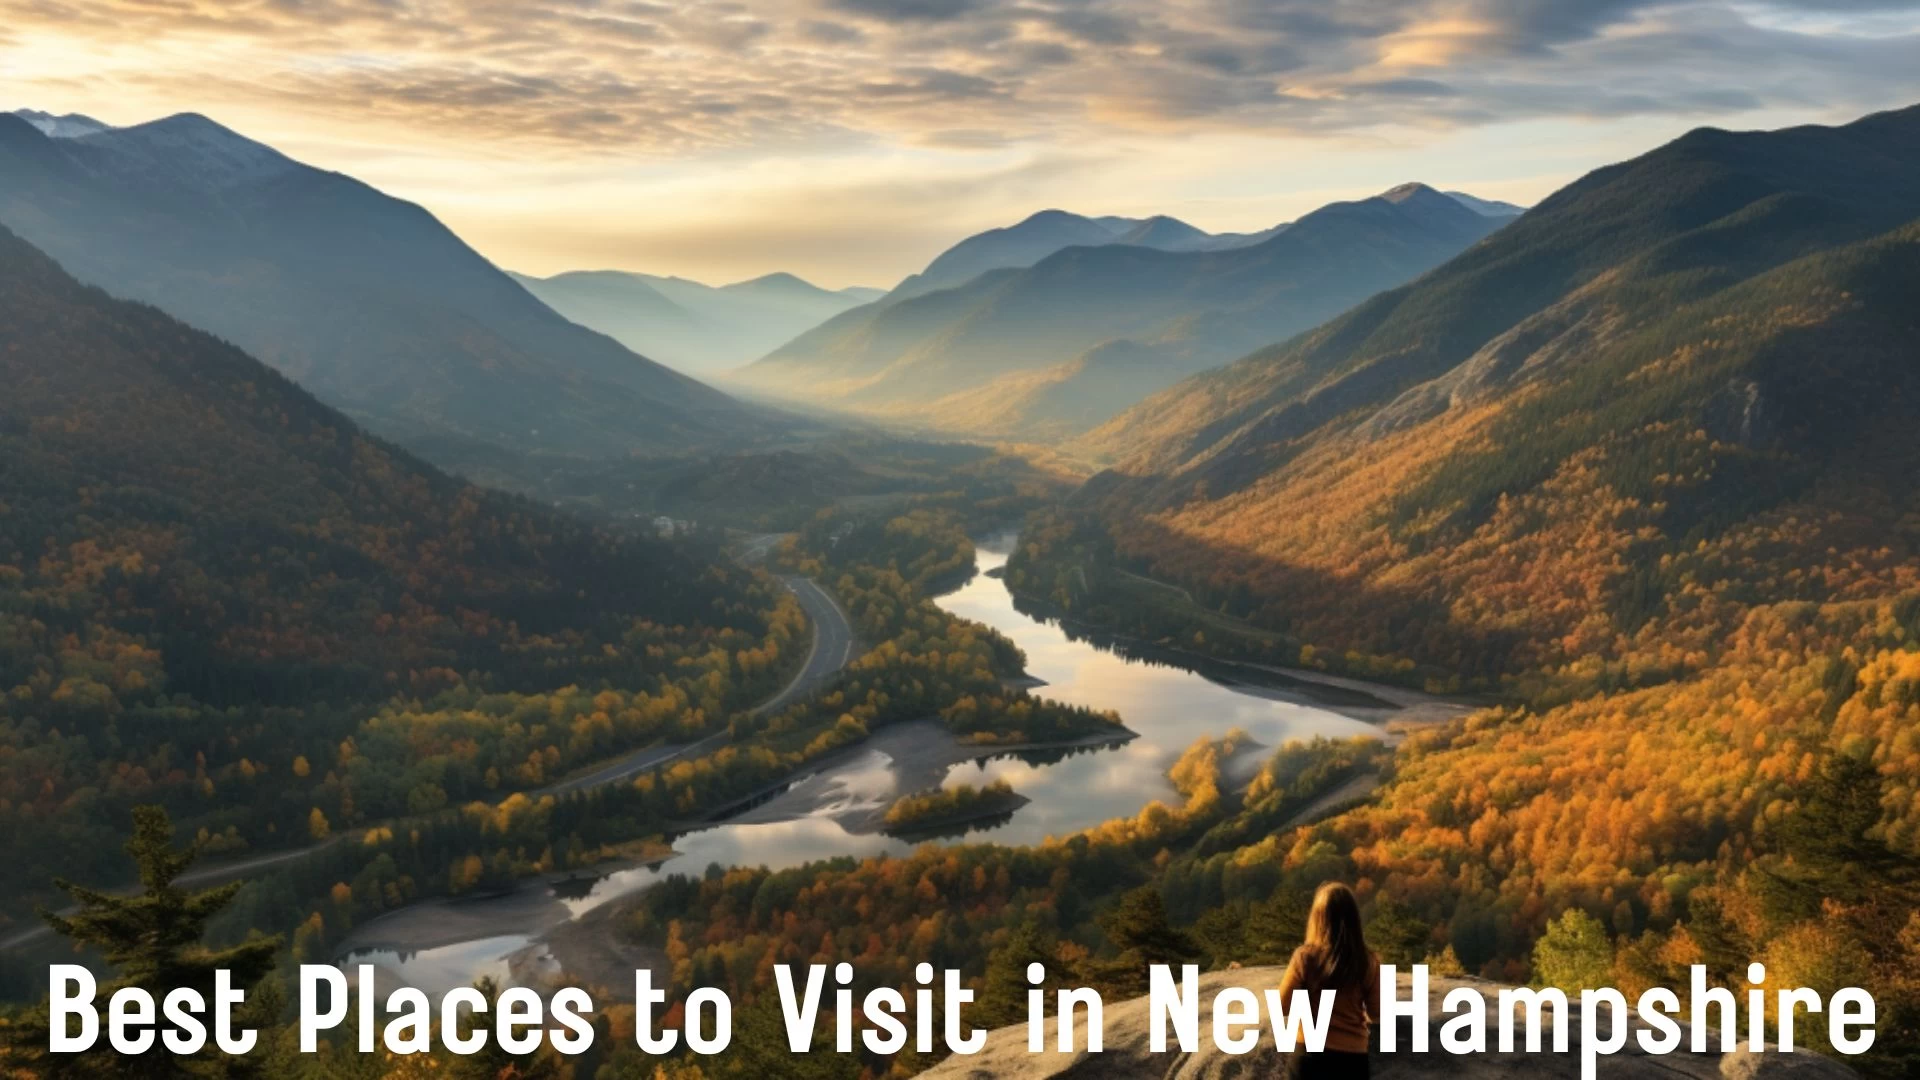 Best Places to Visit in New Hampshire - Top 10 Must - Visit Destinations